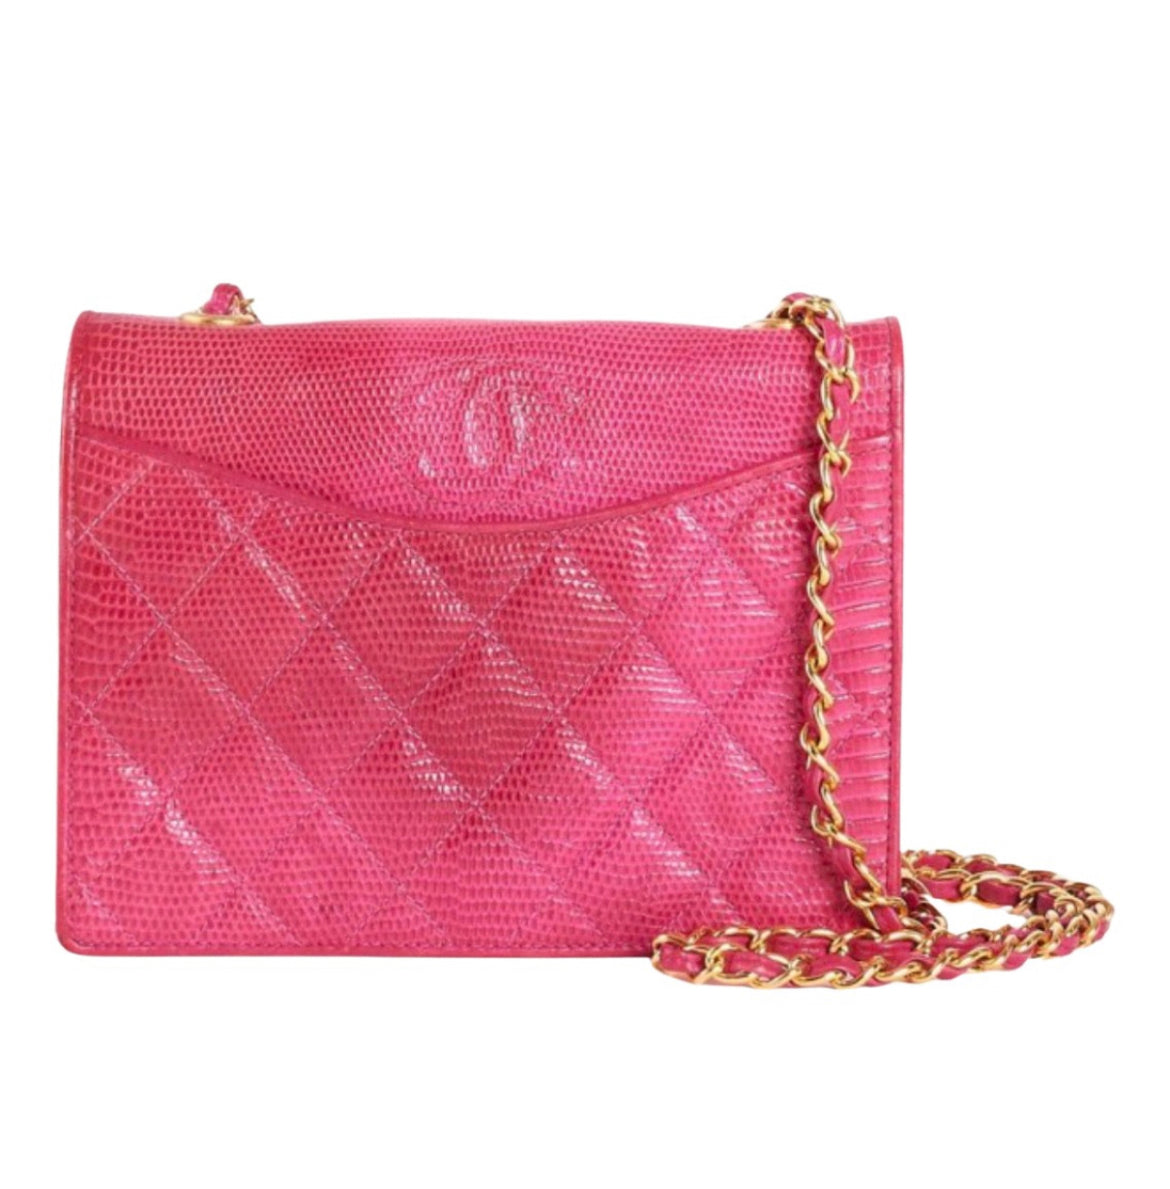 CHANEL Pink Leather Classic Flap Shoulder Bag AUTHENTIC Special Collection